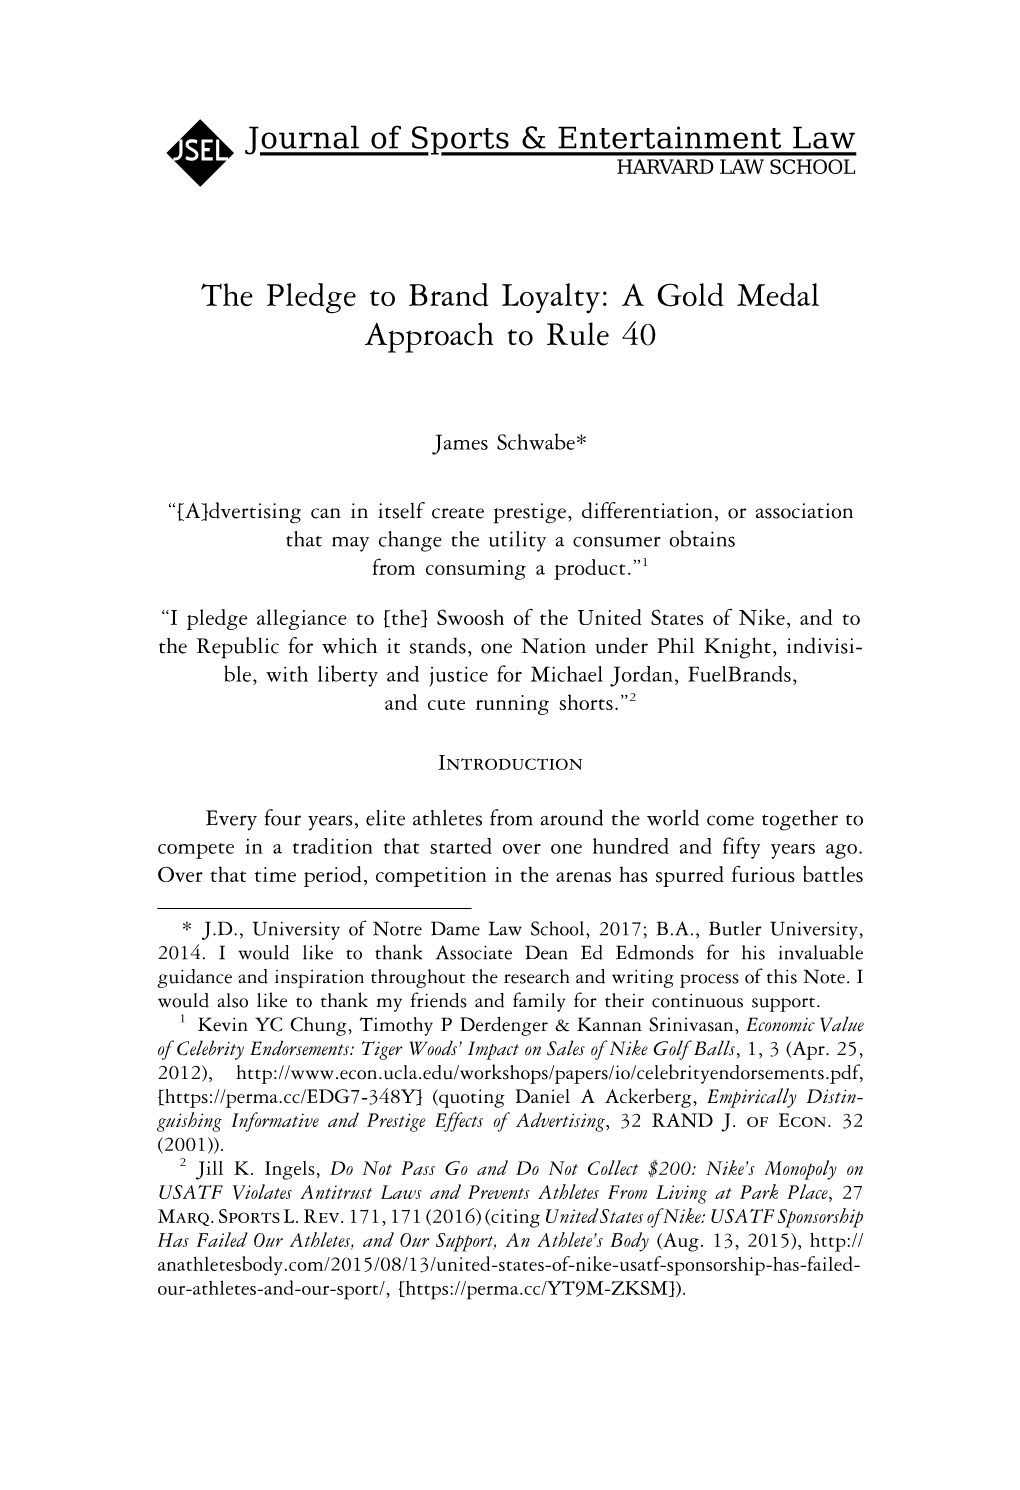 The Pledge to Brand Loyalty: a Gold Medal Approach to Rule 40